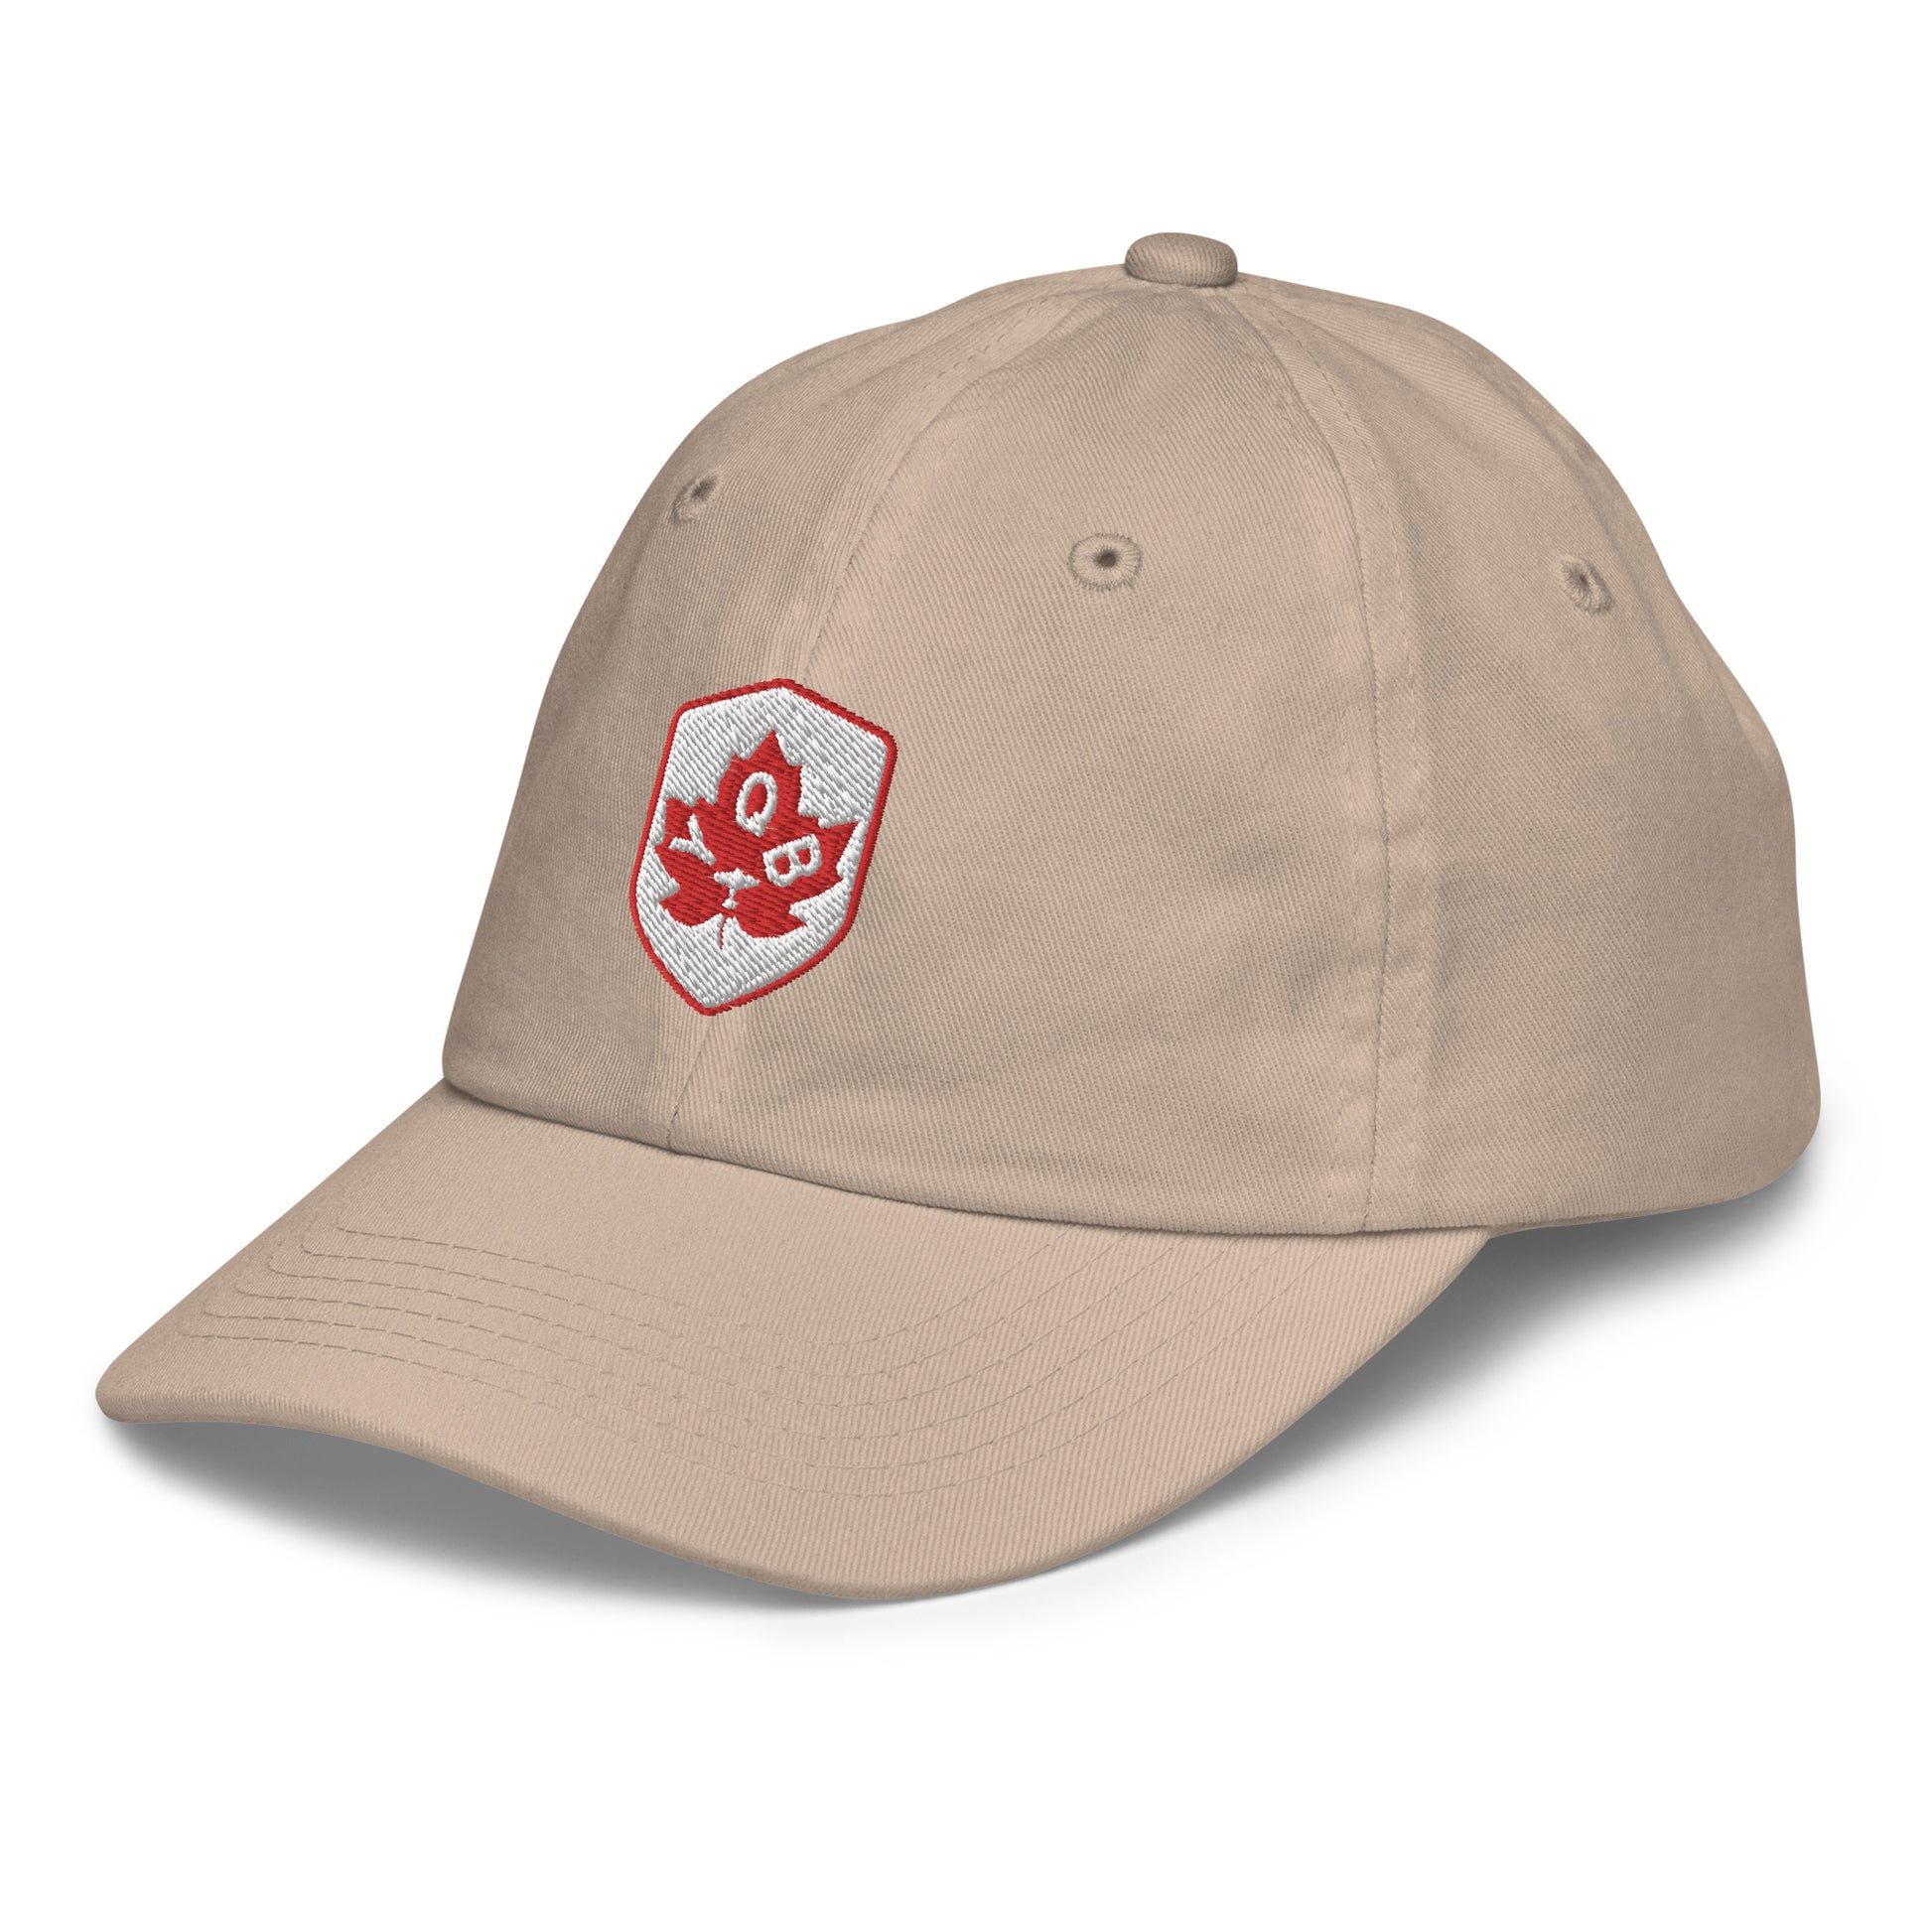 Maple Leaf Kid's Cap - Red/White • YQB Quebec City • YHM Designs - Image 01